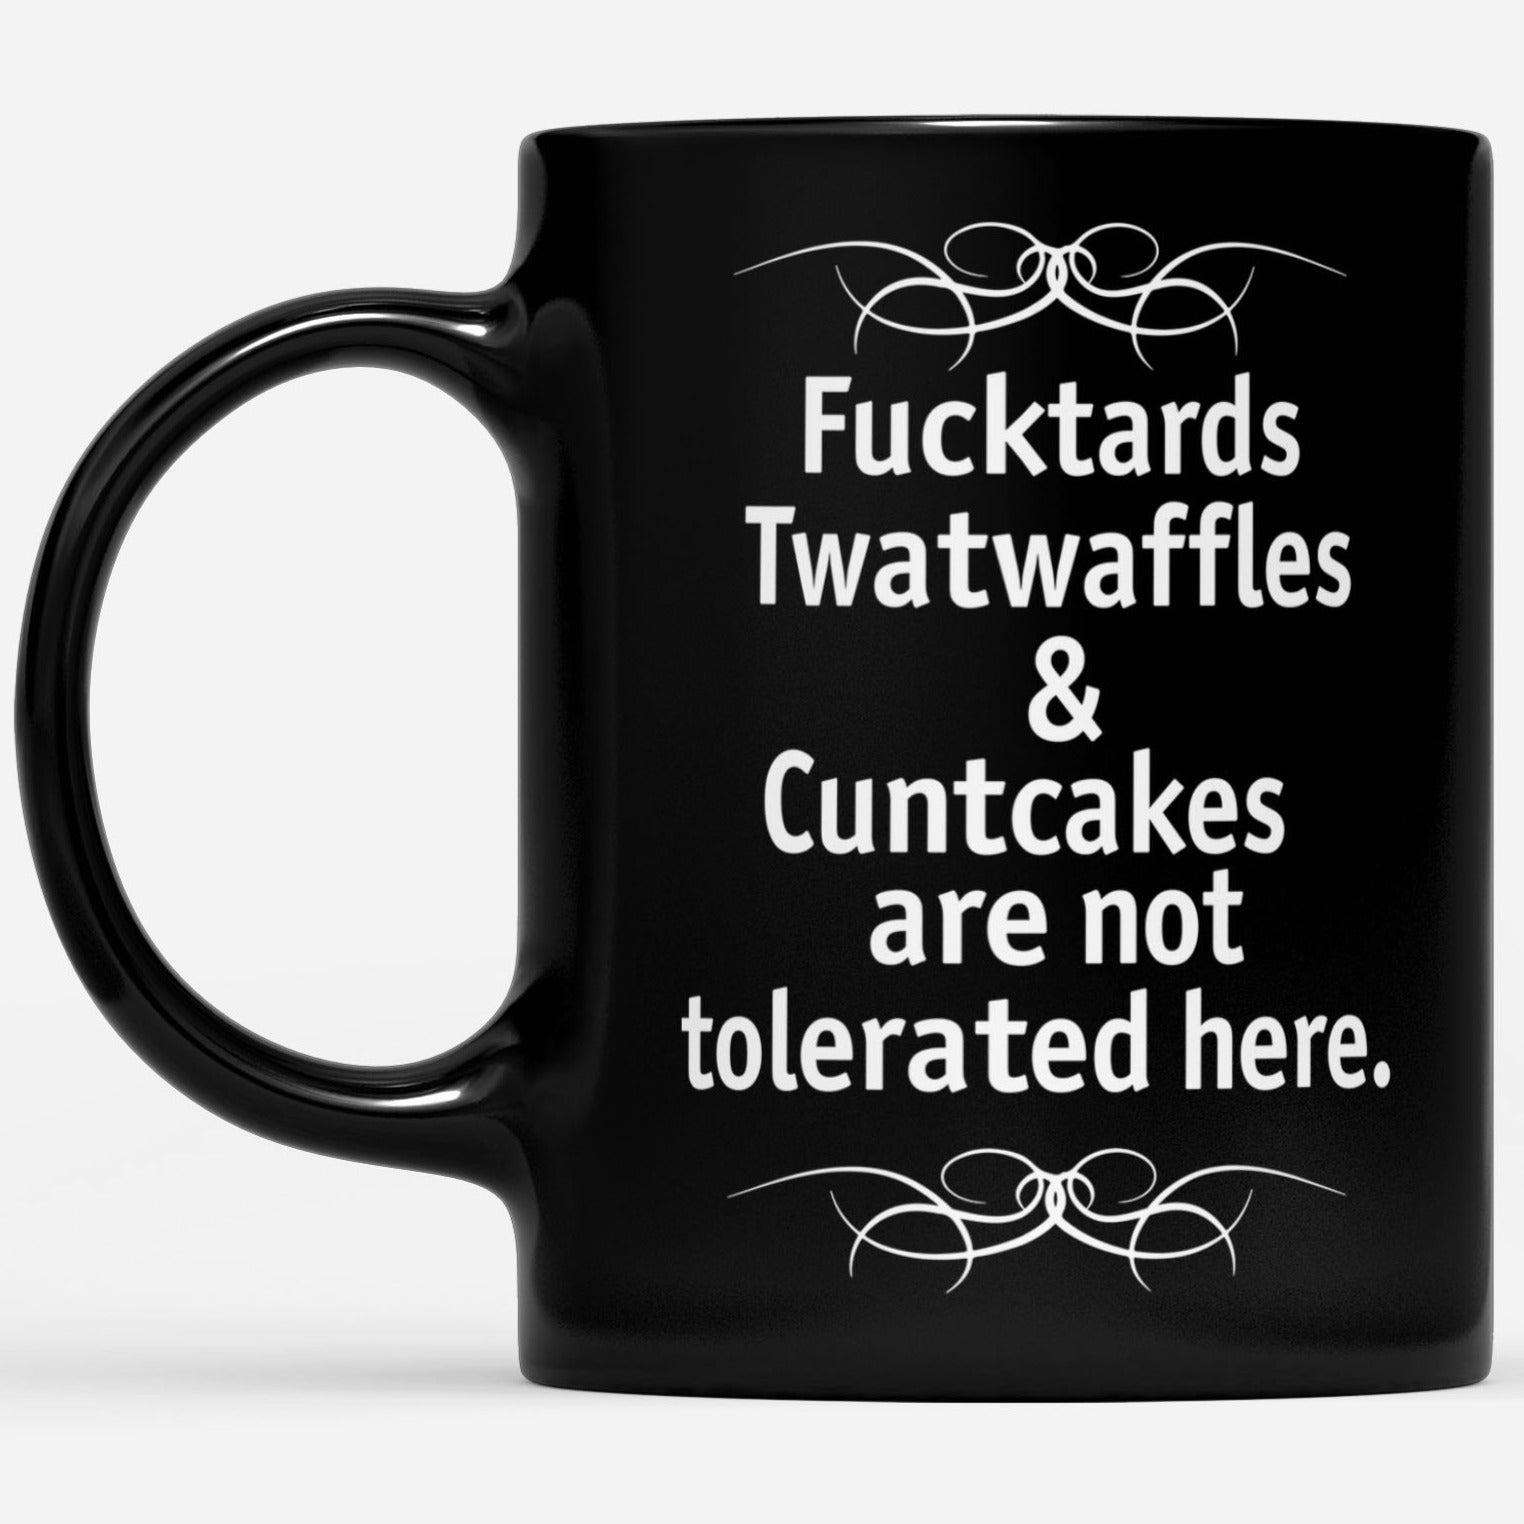 Fucktards Twatwaffles And Cuntcakes Are Not Tolerated Here Mug